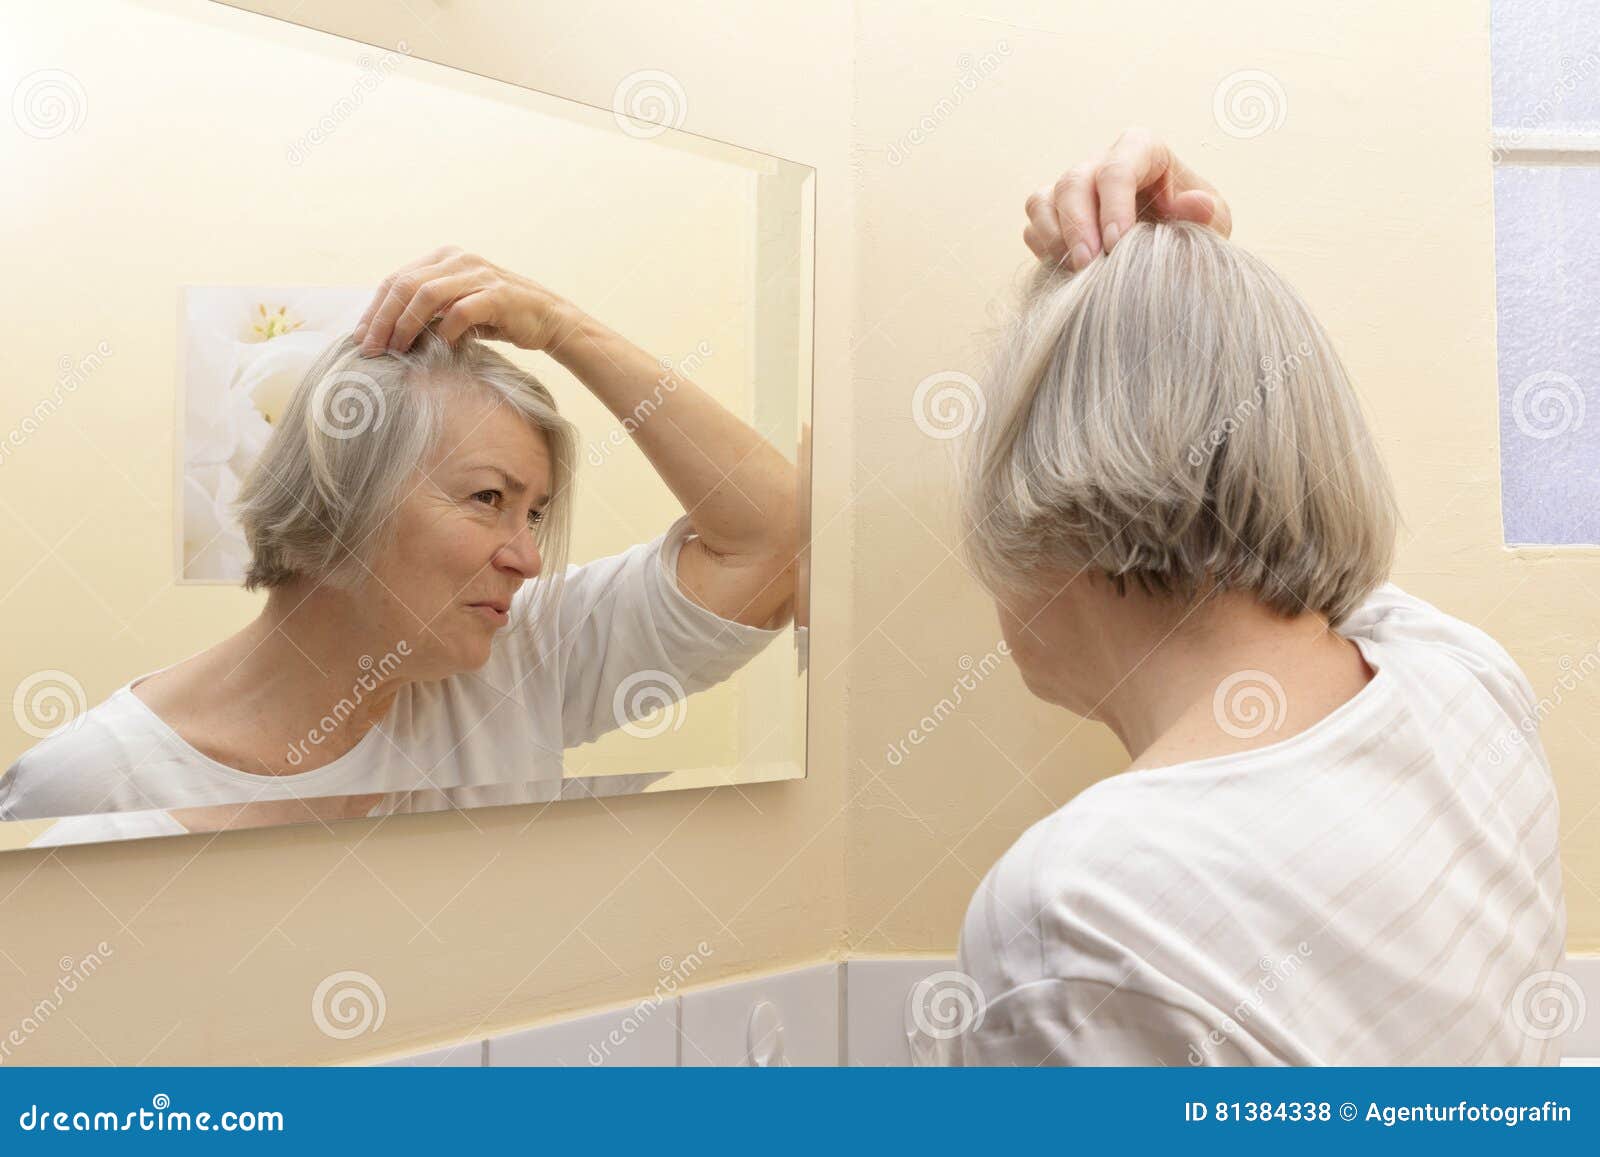 Best Causes Of Hair Loss In Elderly Females for Oval Face